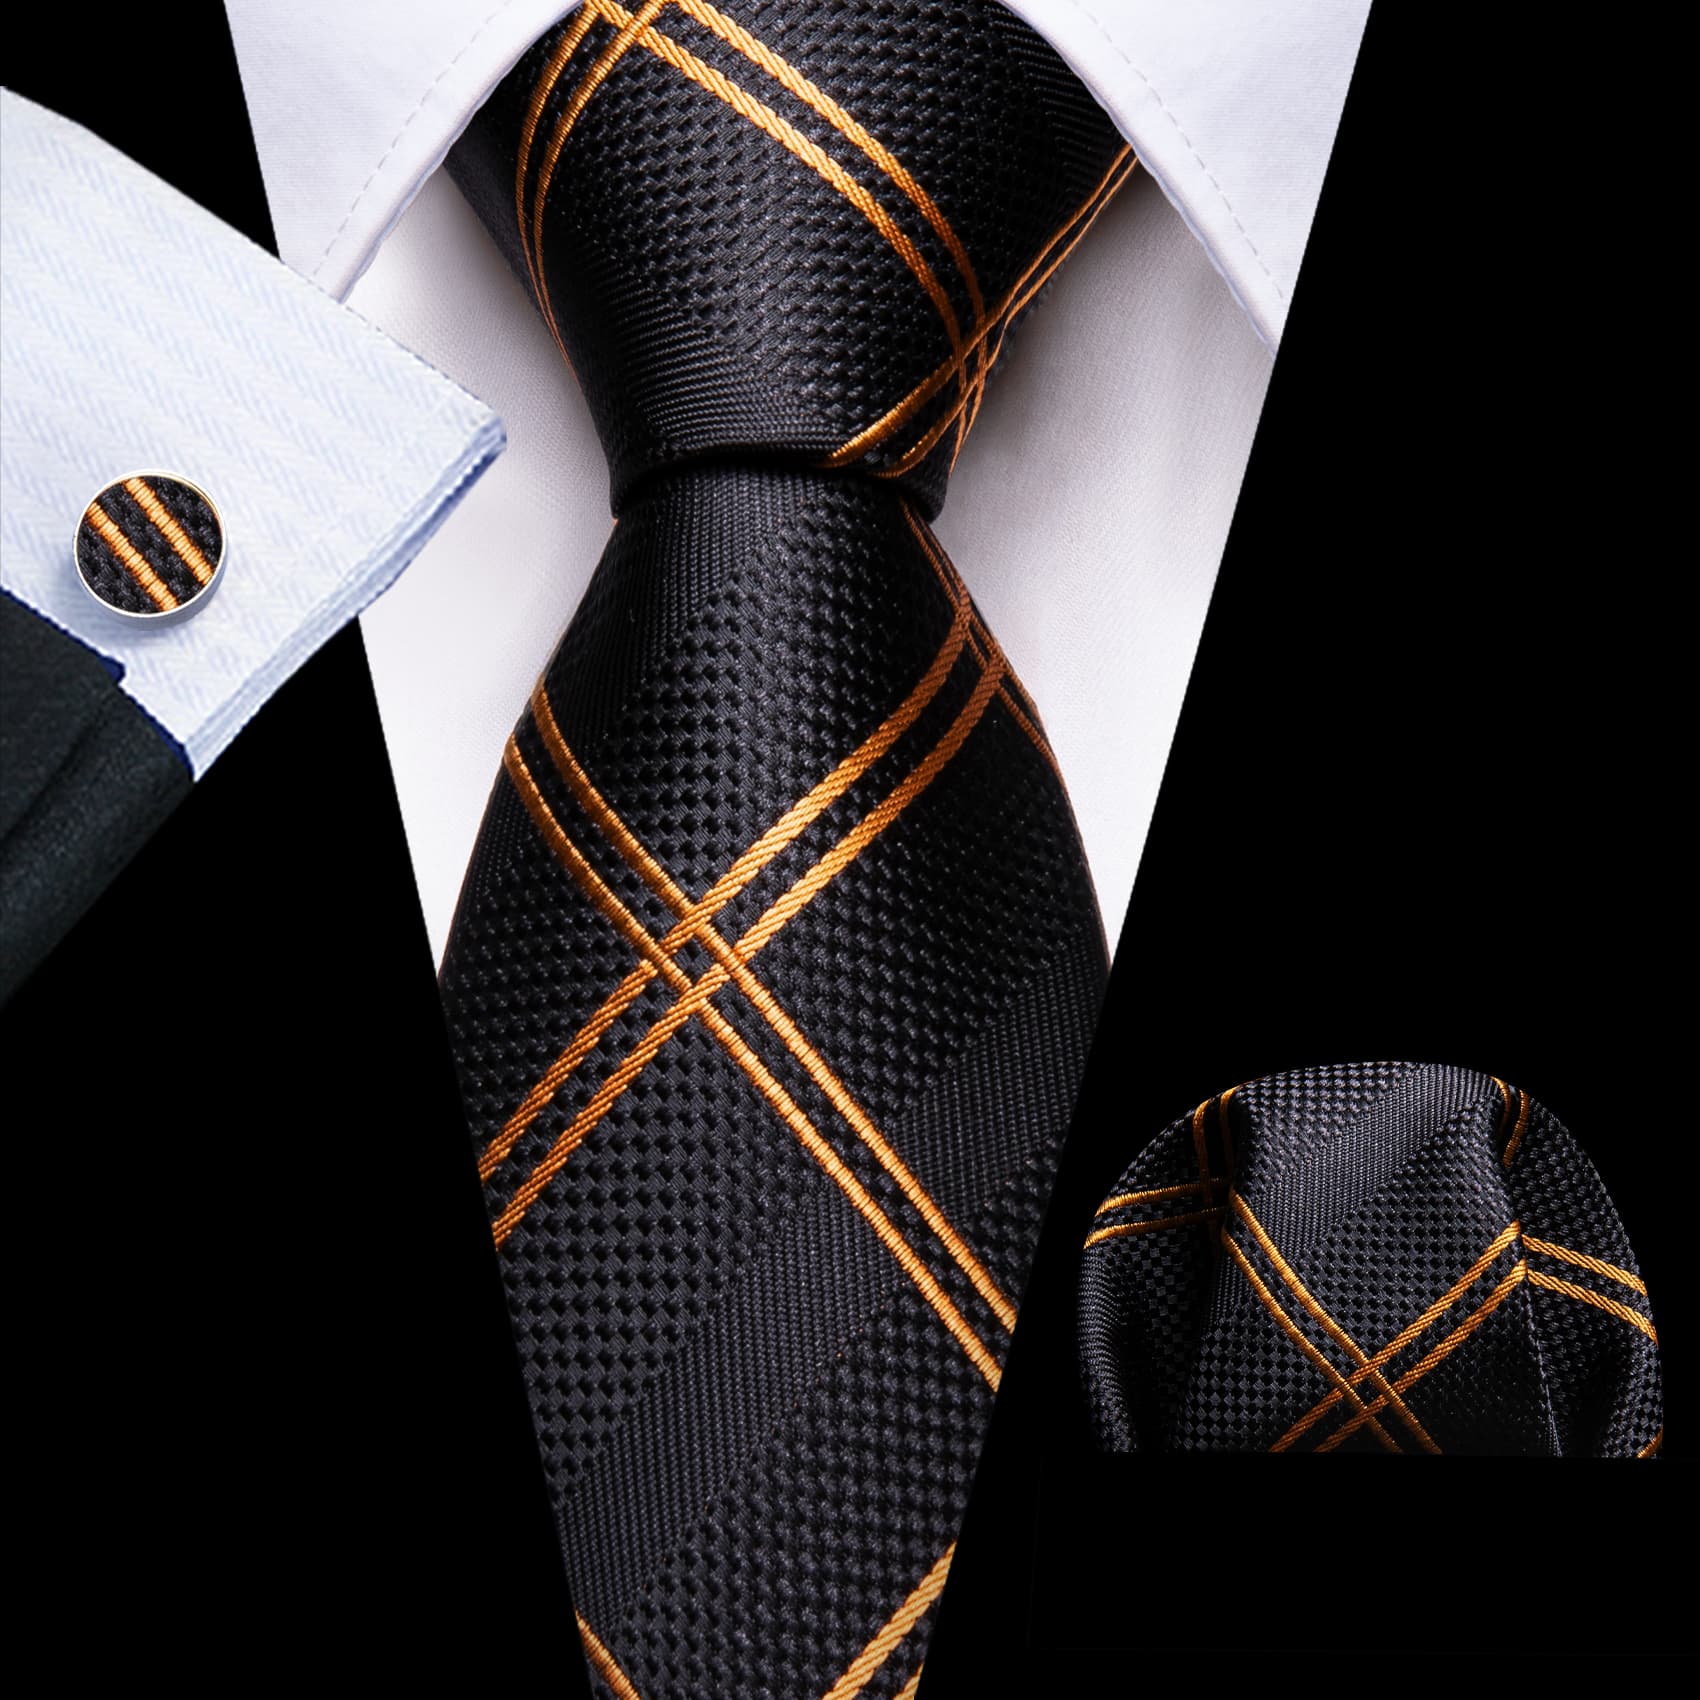 barry wang black tie gold lines 